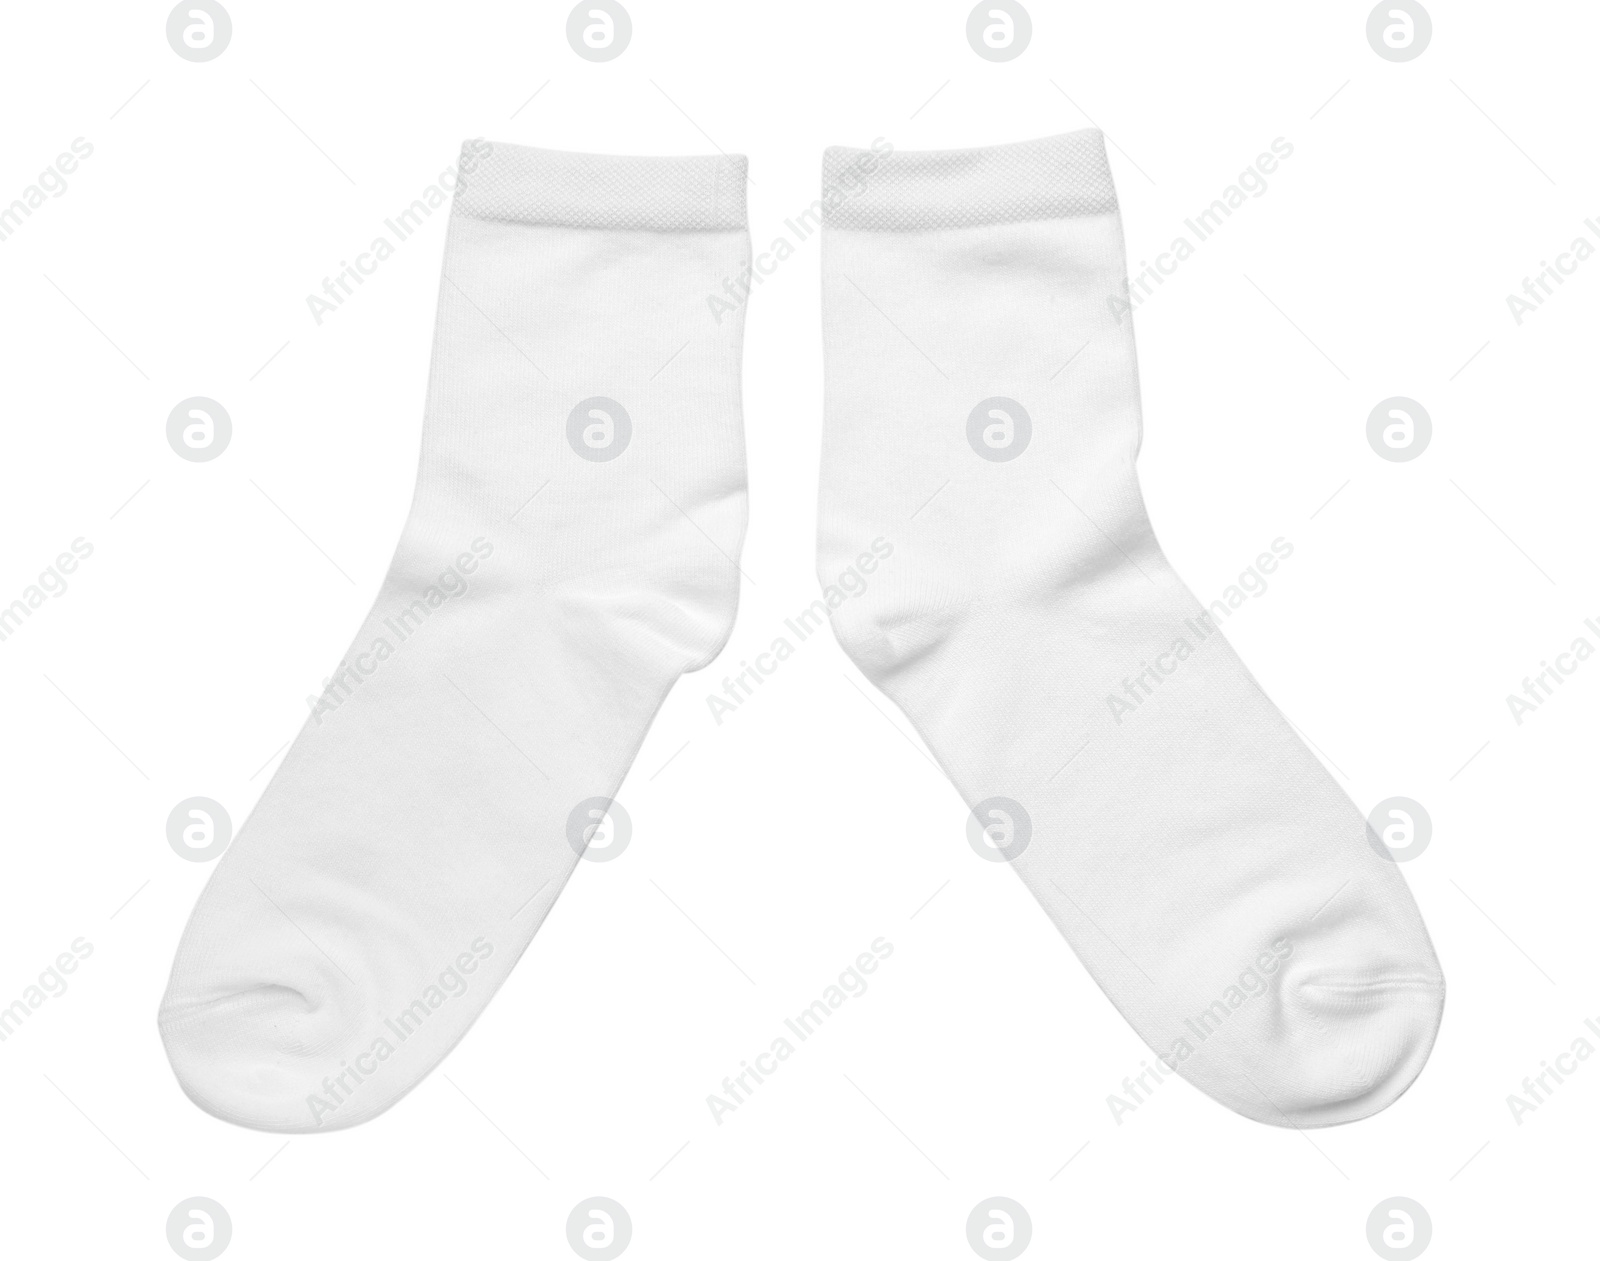 Photo of Pair of new socks isolated on white, top view